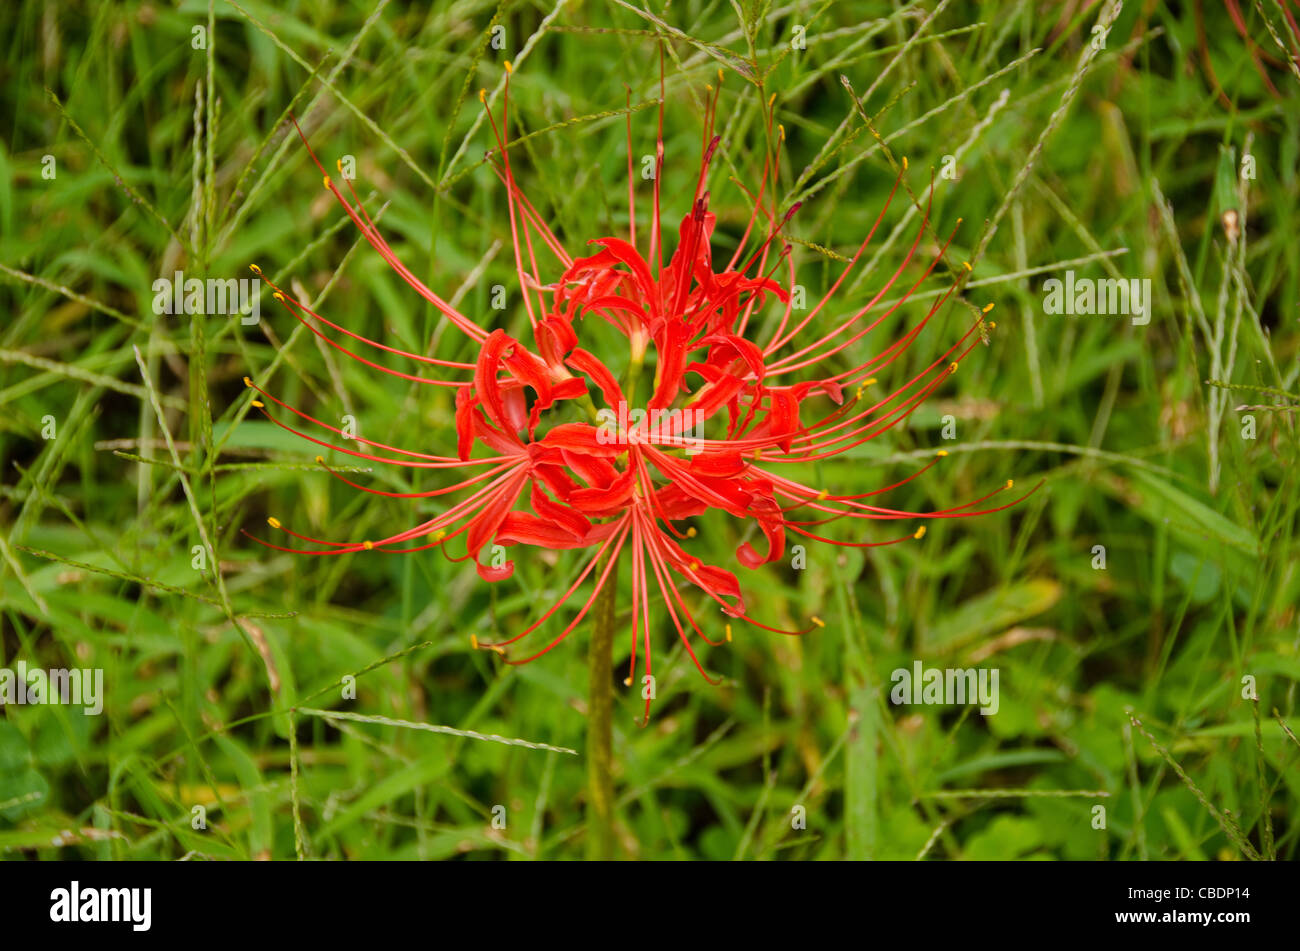 Flower of the Red spider lily, Lycoris radiata Stock Photo